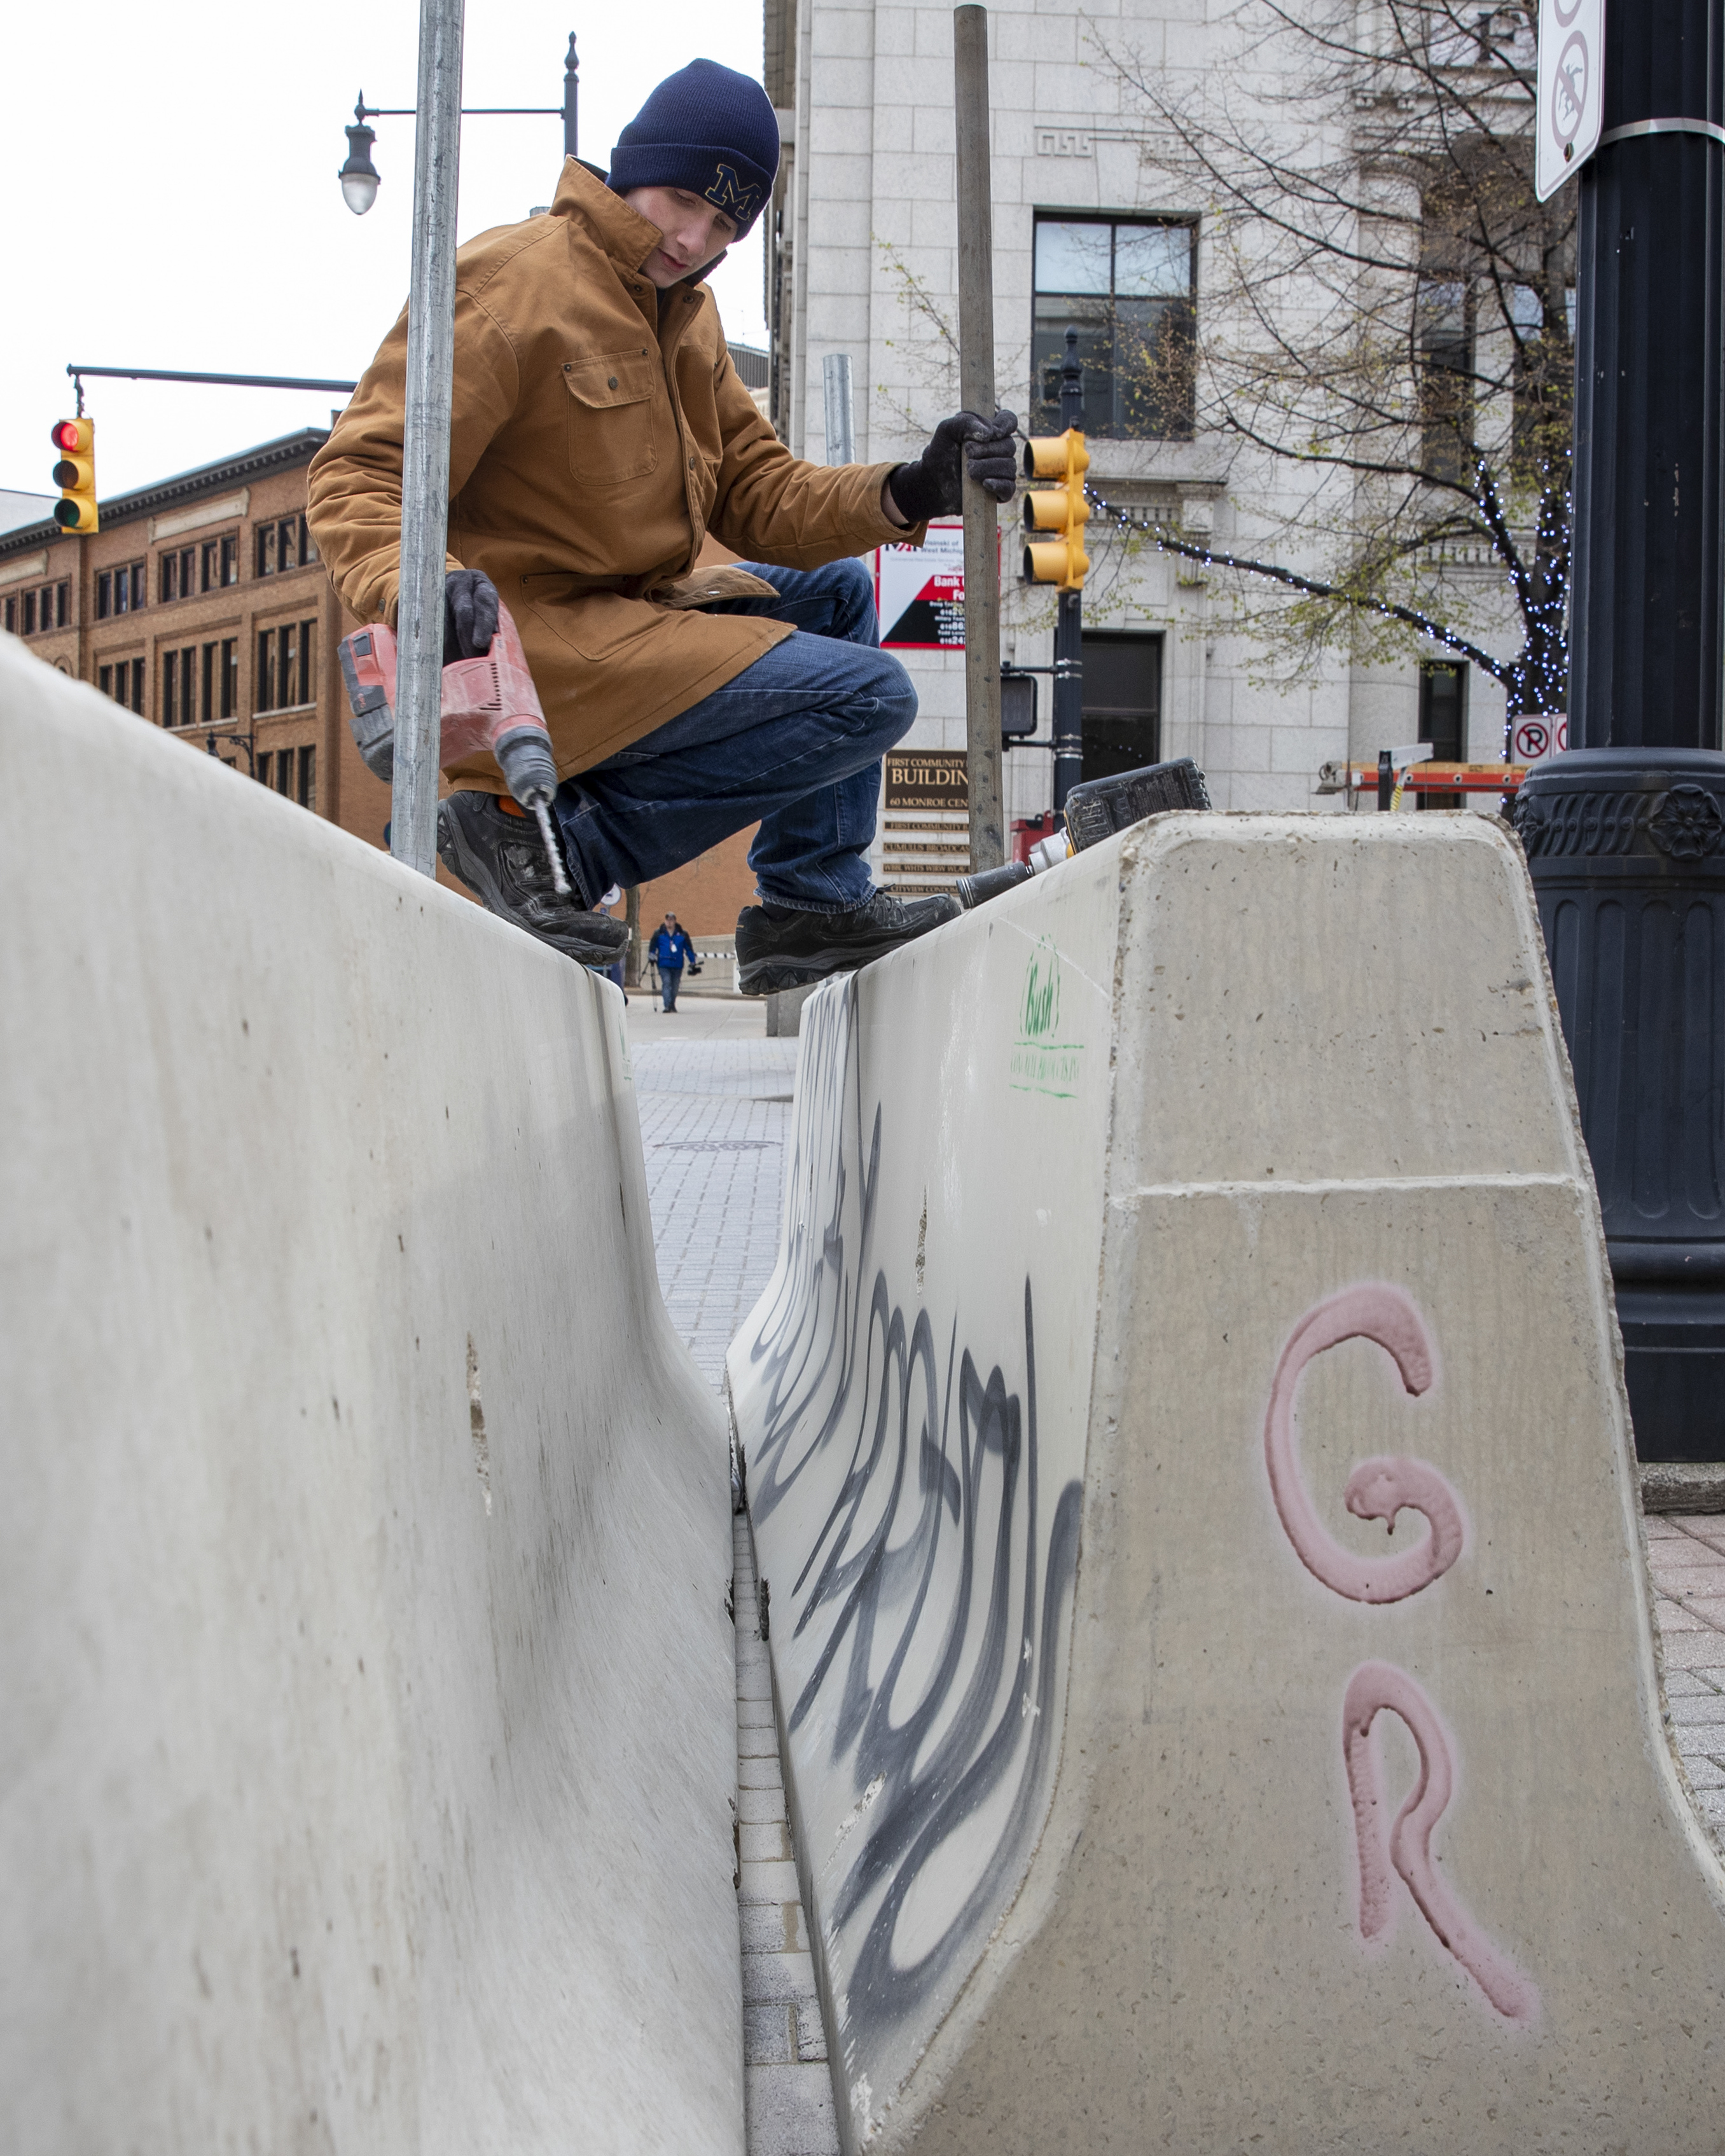 Cole Bond, from Fence Consultants of West Michigan, puts up barricades in downtown Grand Rapids on Tuesday, April 20, 2021, as a jury deliberates fate of Derek Chauvin in death of George Floyd. A riot on May 30, 2020, caused significant property damage in the aftermath of a peaceful protest following the death of Floyd in Minneapolis. (Cory Morse | MLive.com)